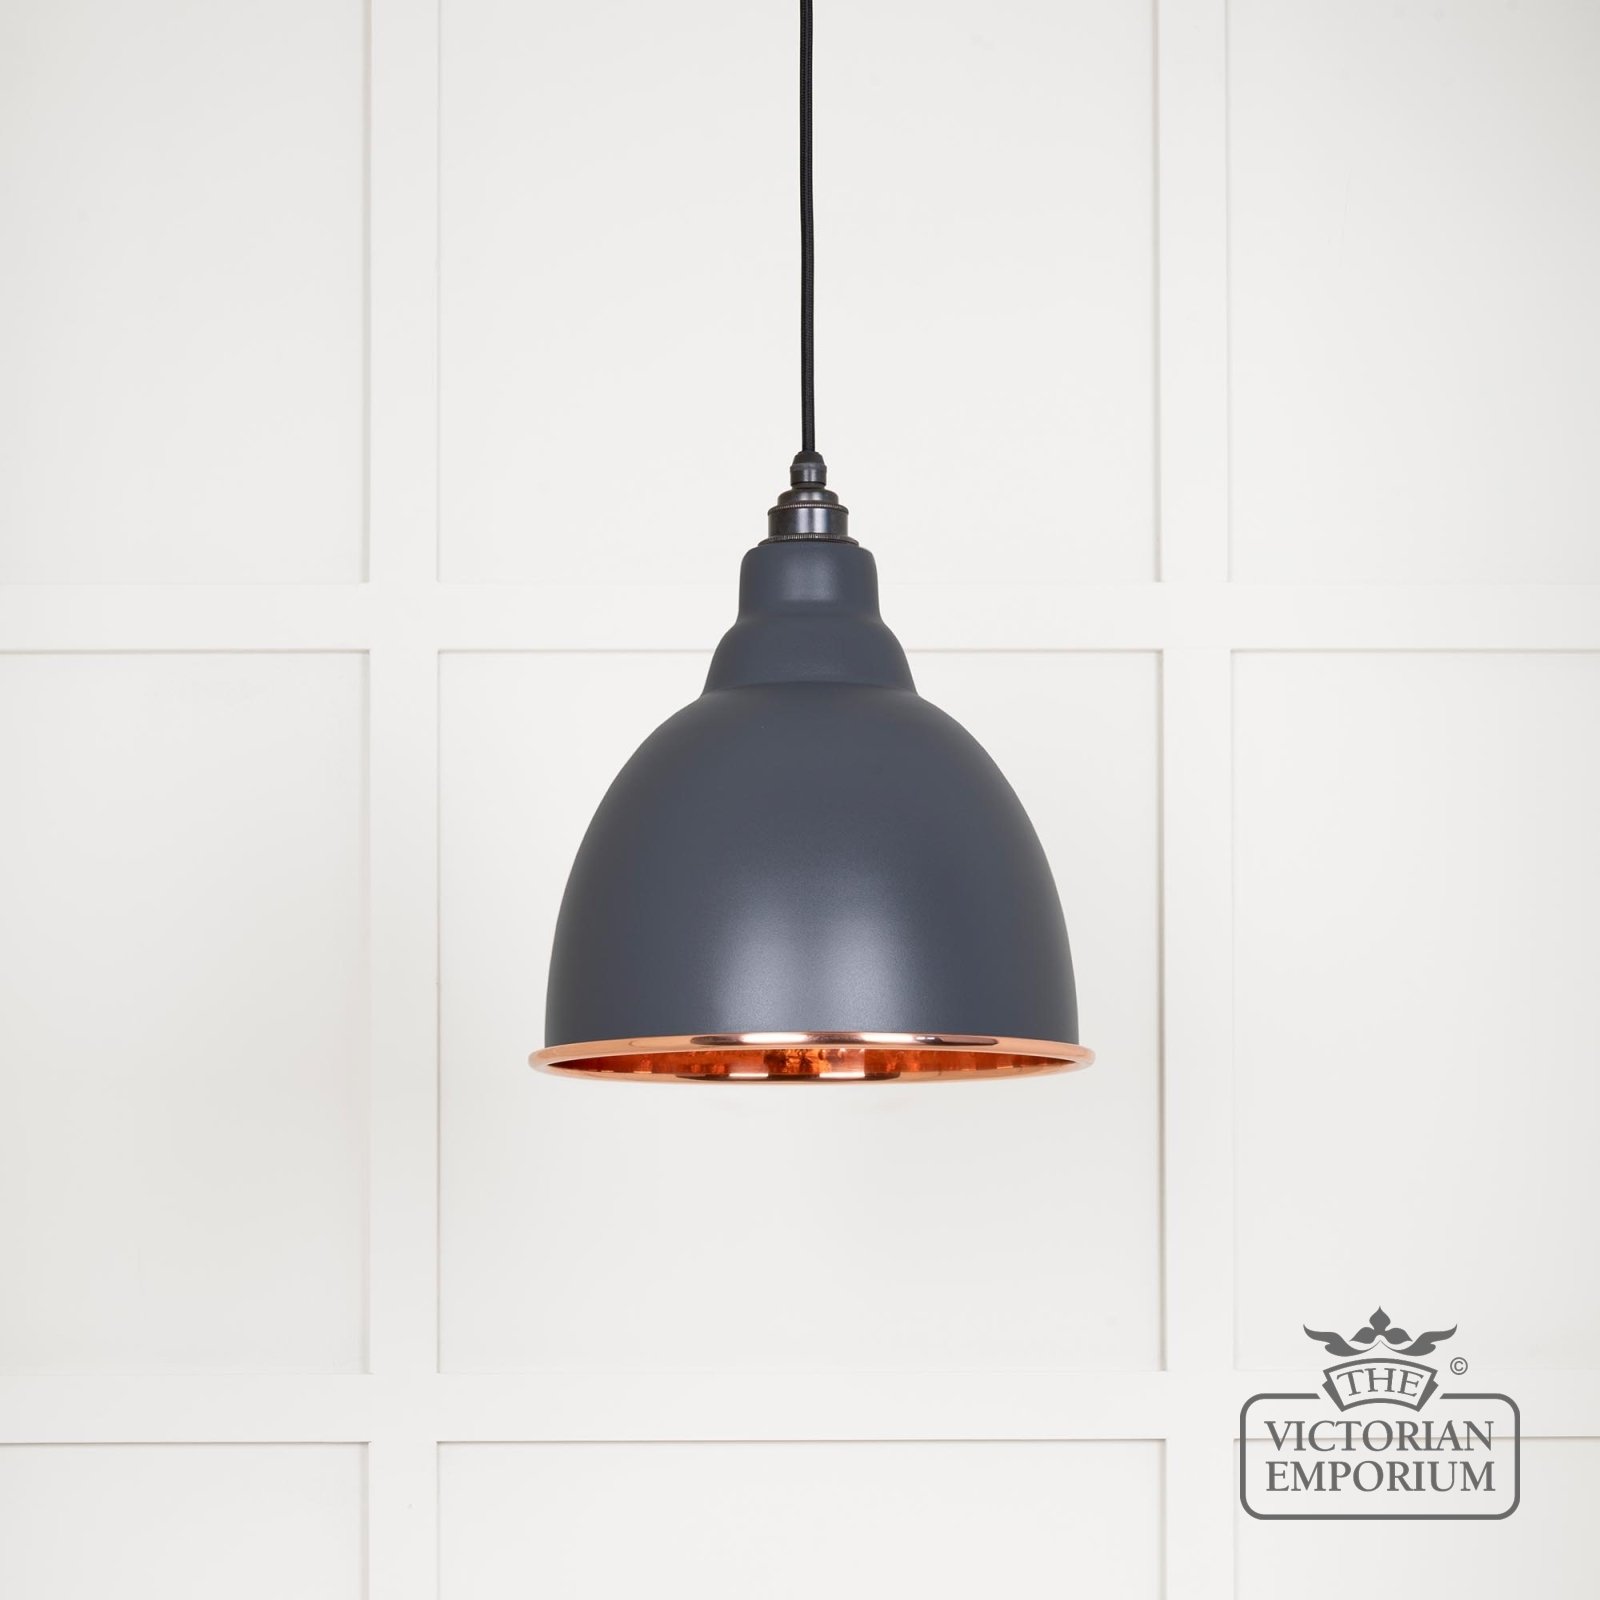 Brindle Pendant Light in Slate with Hammered Copper Interior